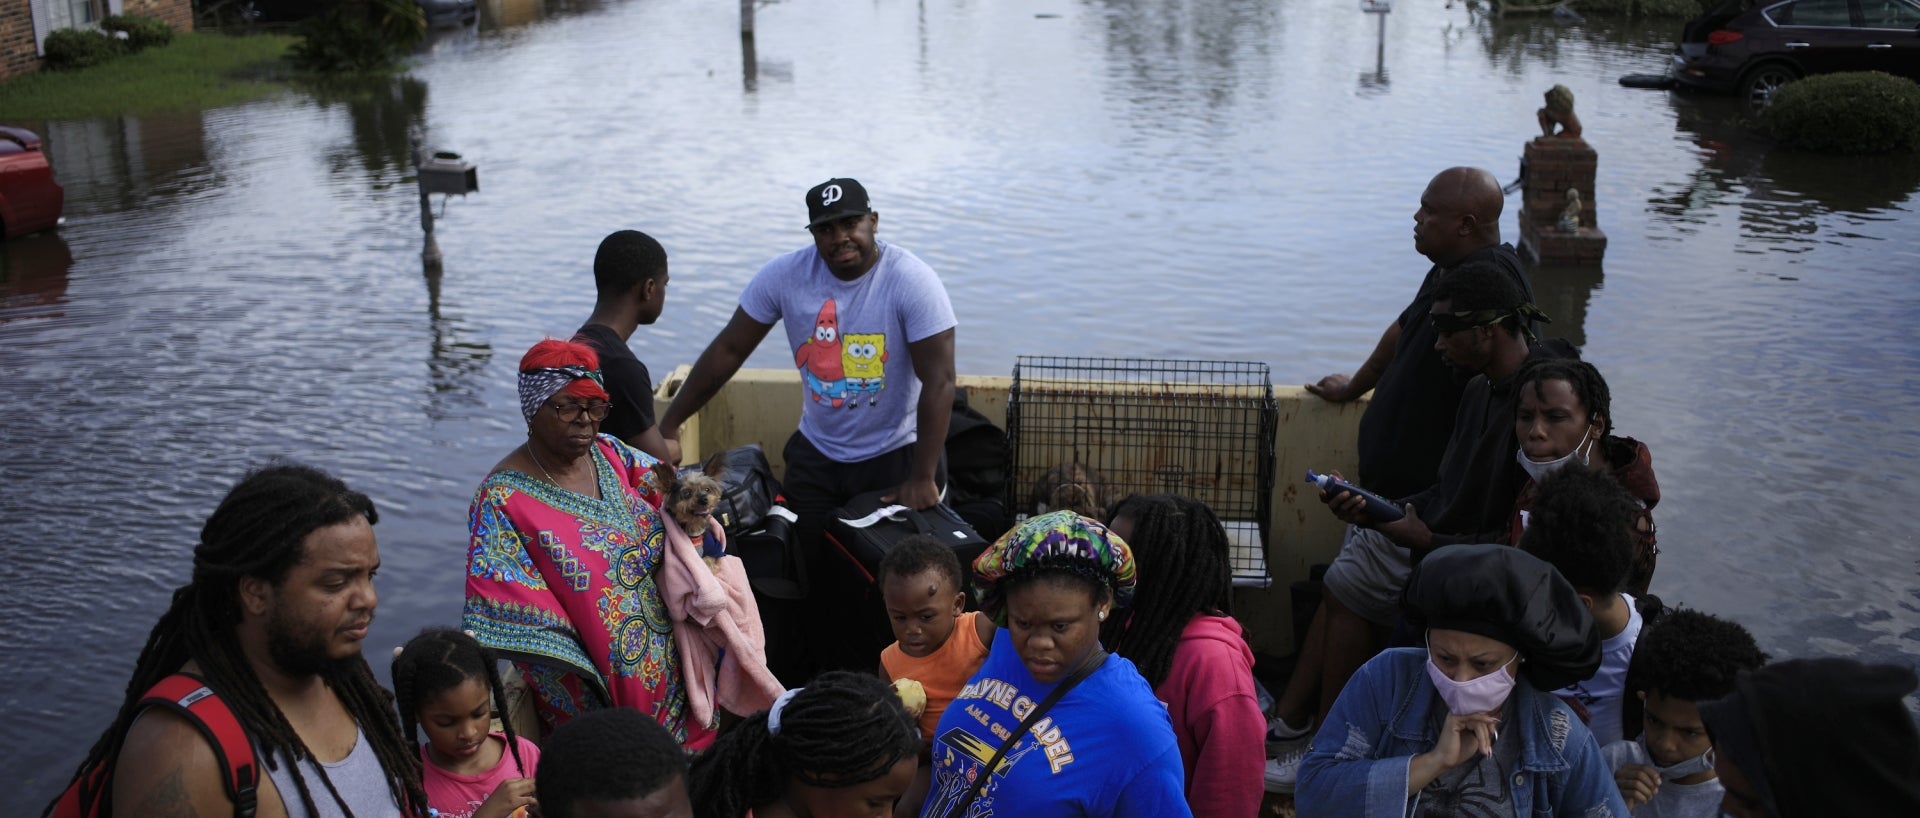 Residents ride in a high water vehicle after being rescued from floodwater left behind by Hurricane Ida in LaPlace, Louisiana, U.S., on Monday, Aug. 30, 2021.